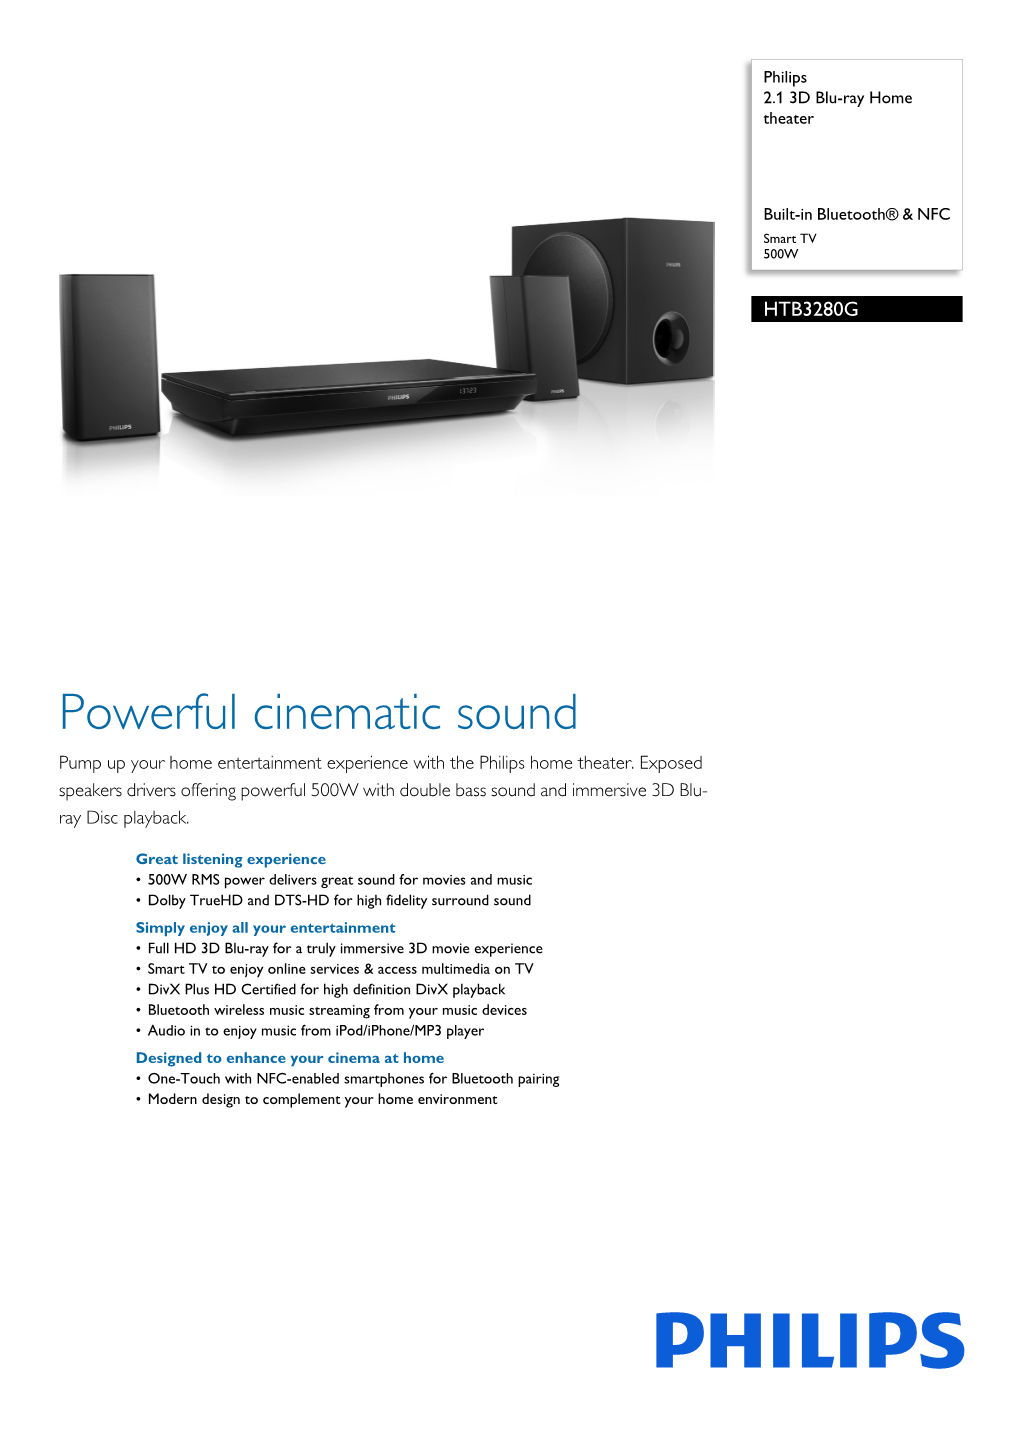 HTB3280G/12 Philips 2.1 3D Blu-Ray Home Theater